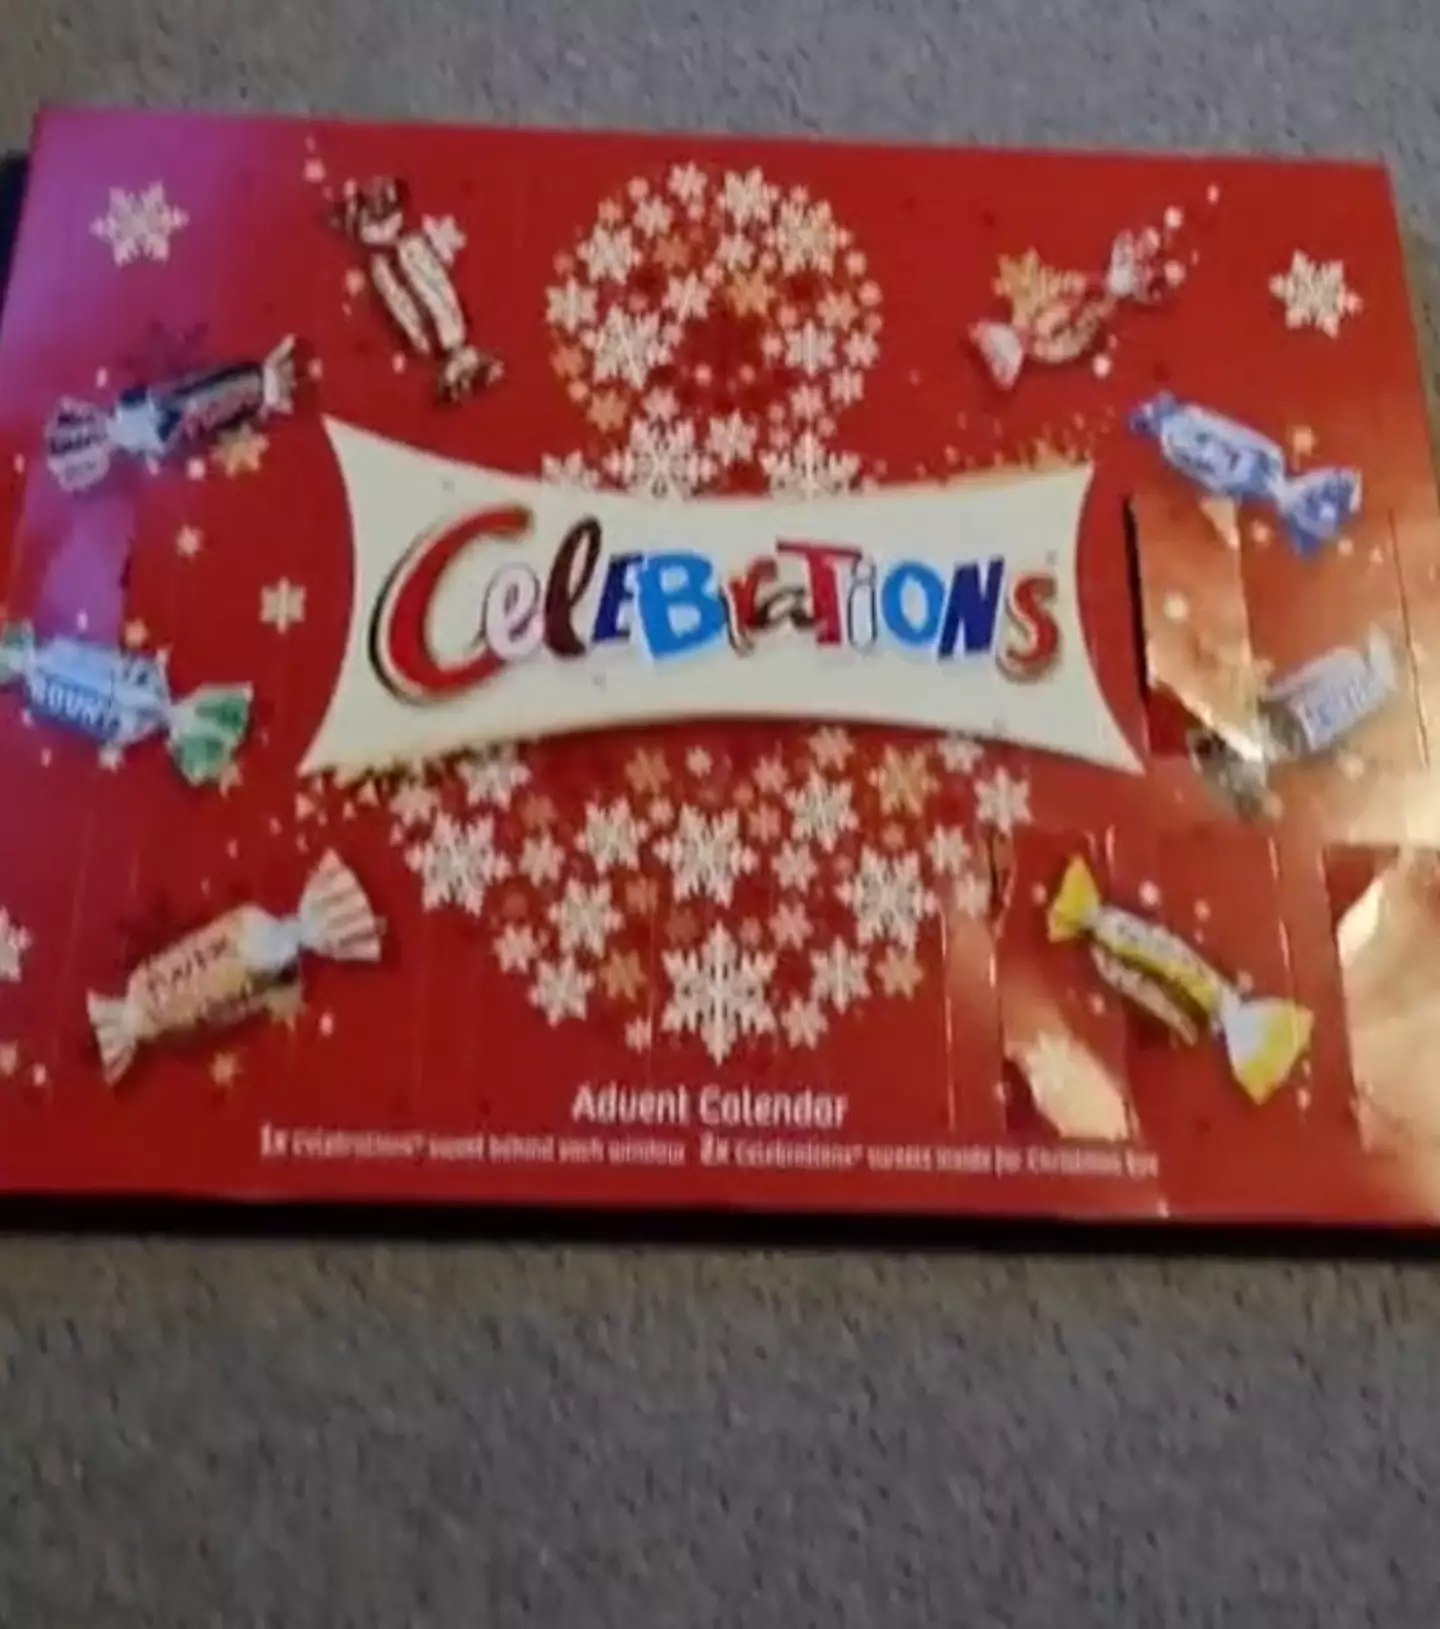 The Celebrations advent calendar hasn’t got off to a good start with chocolate-lovers.